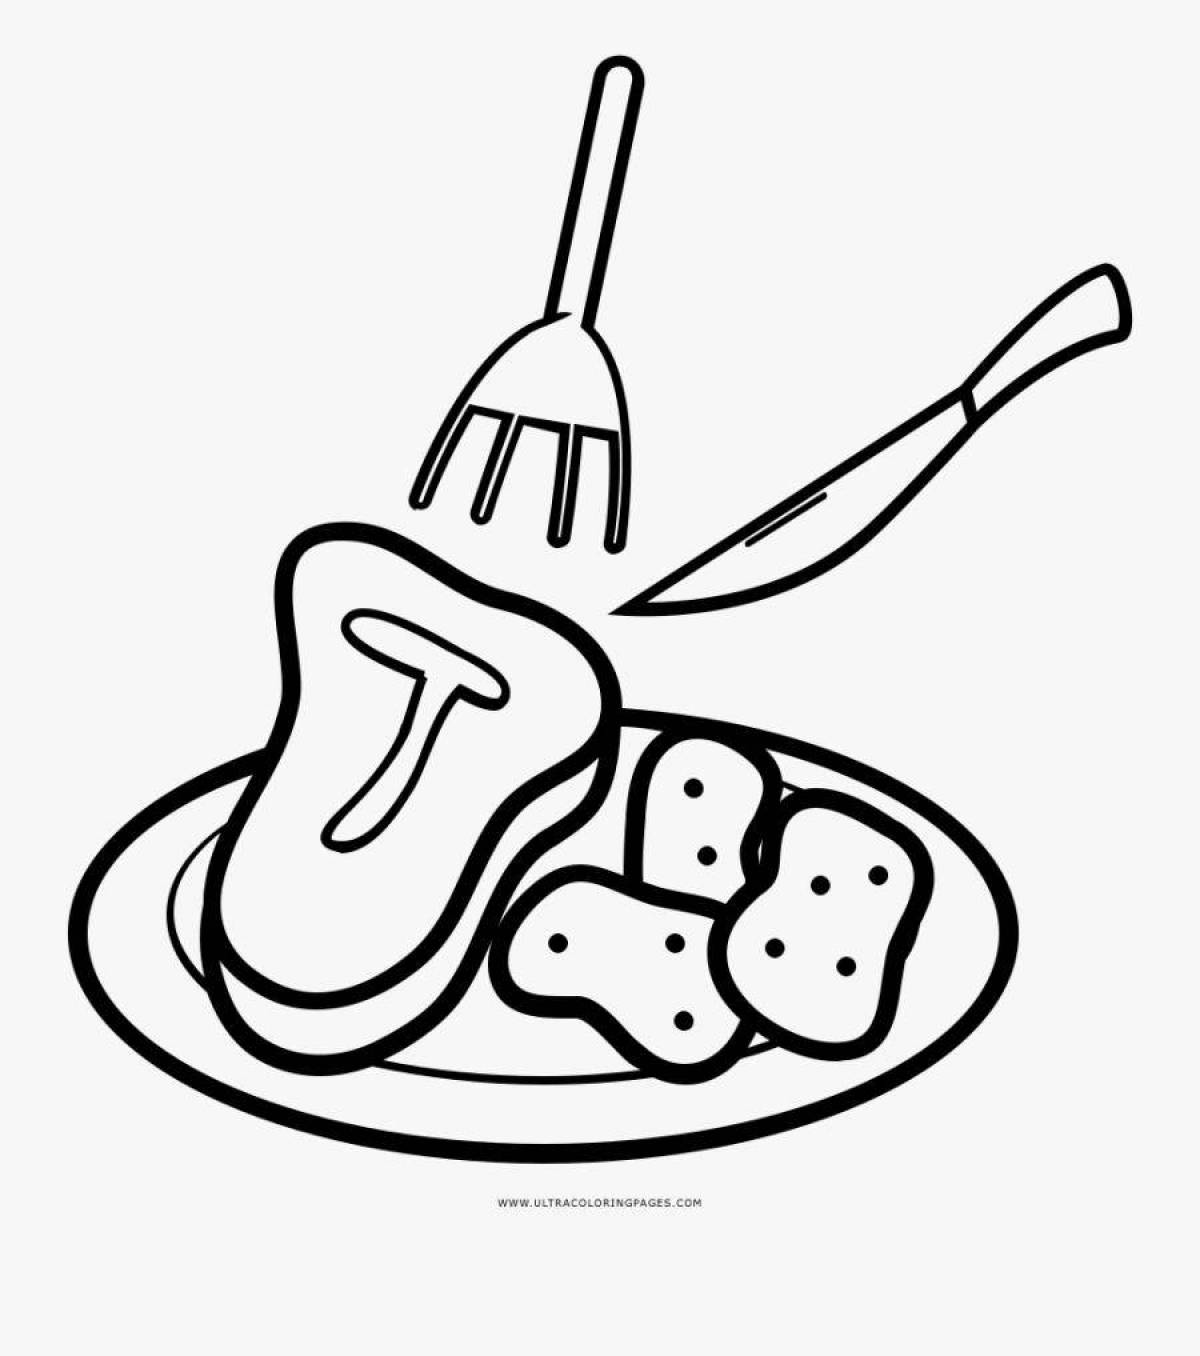 Gourmet dinner coloring page